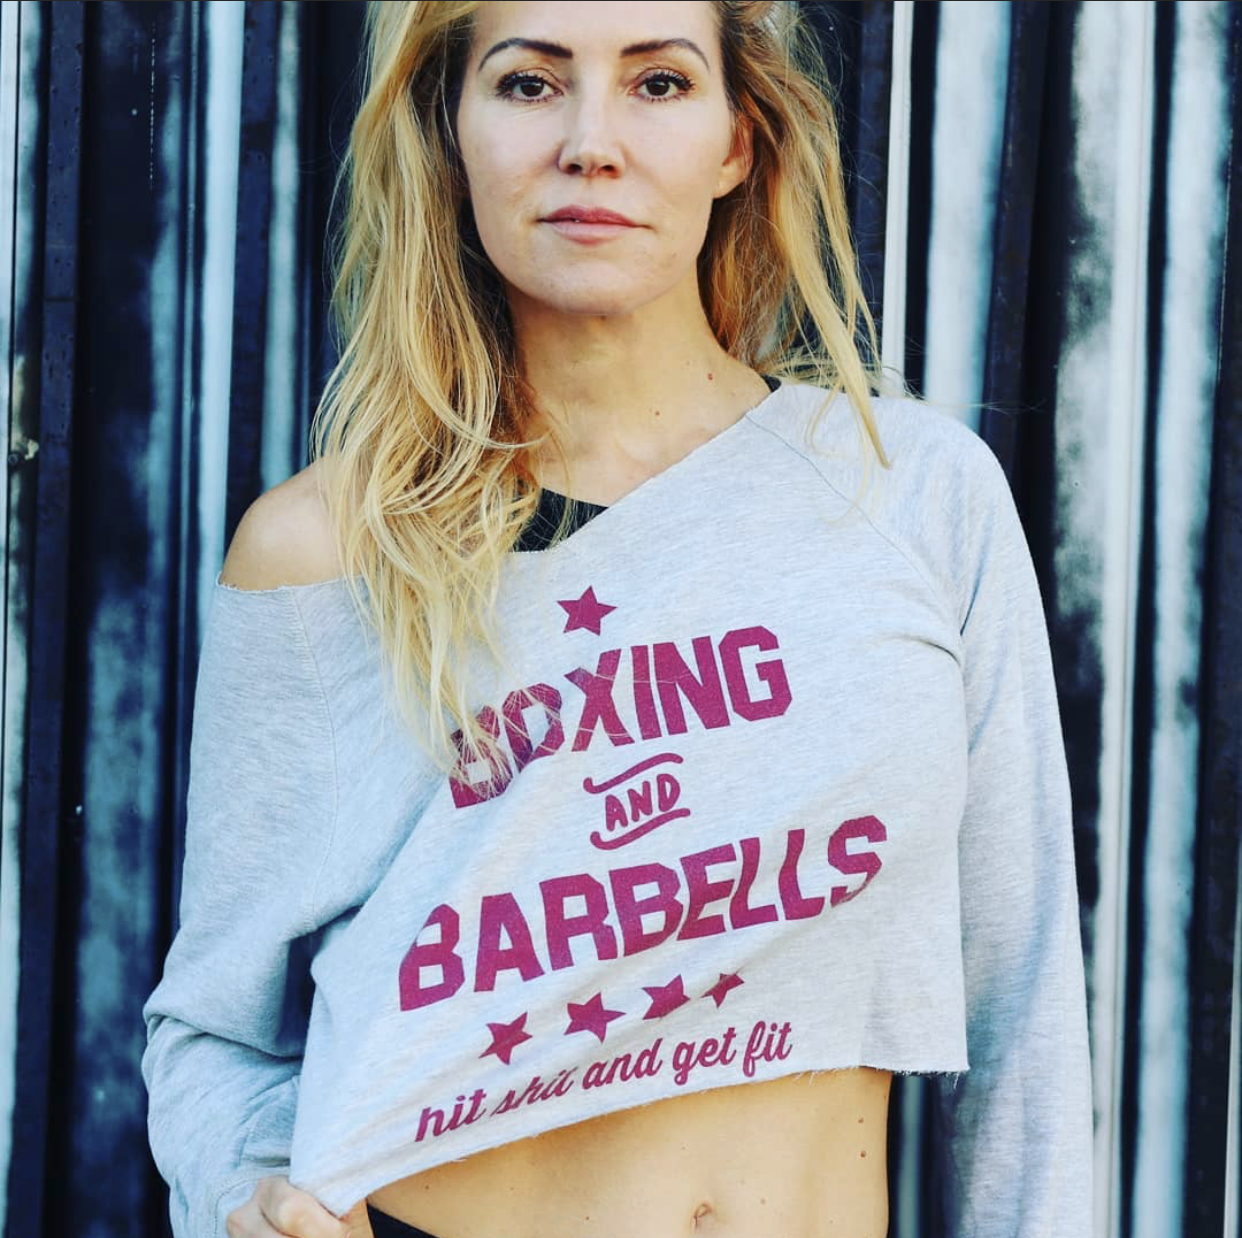 boxing and barbells